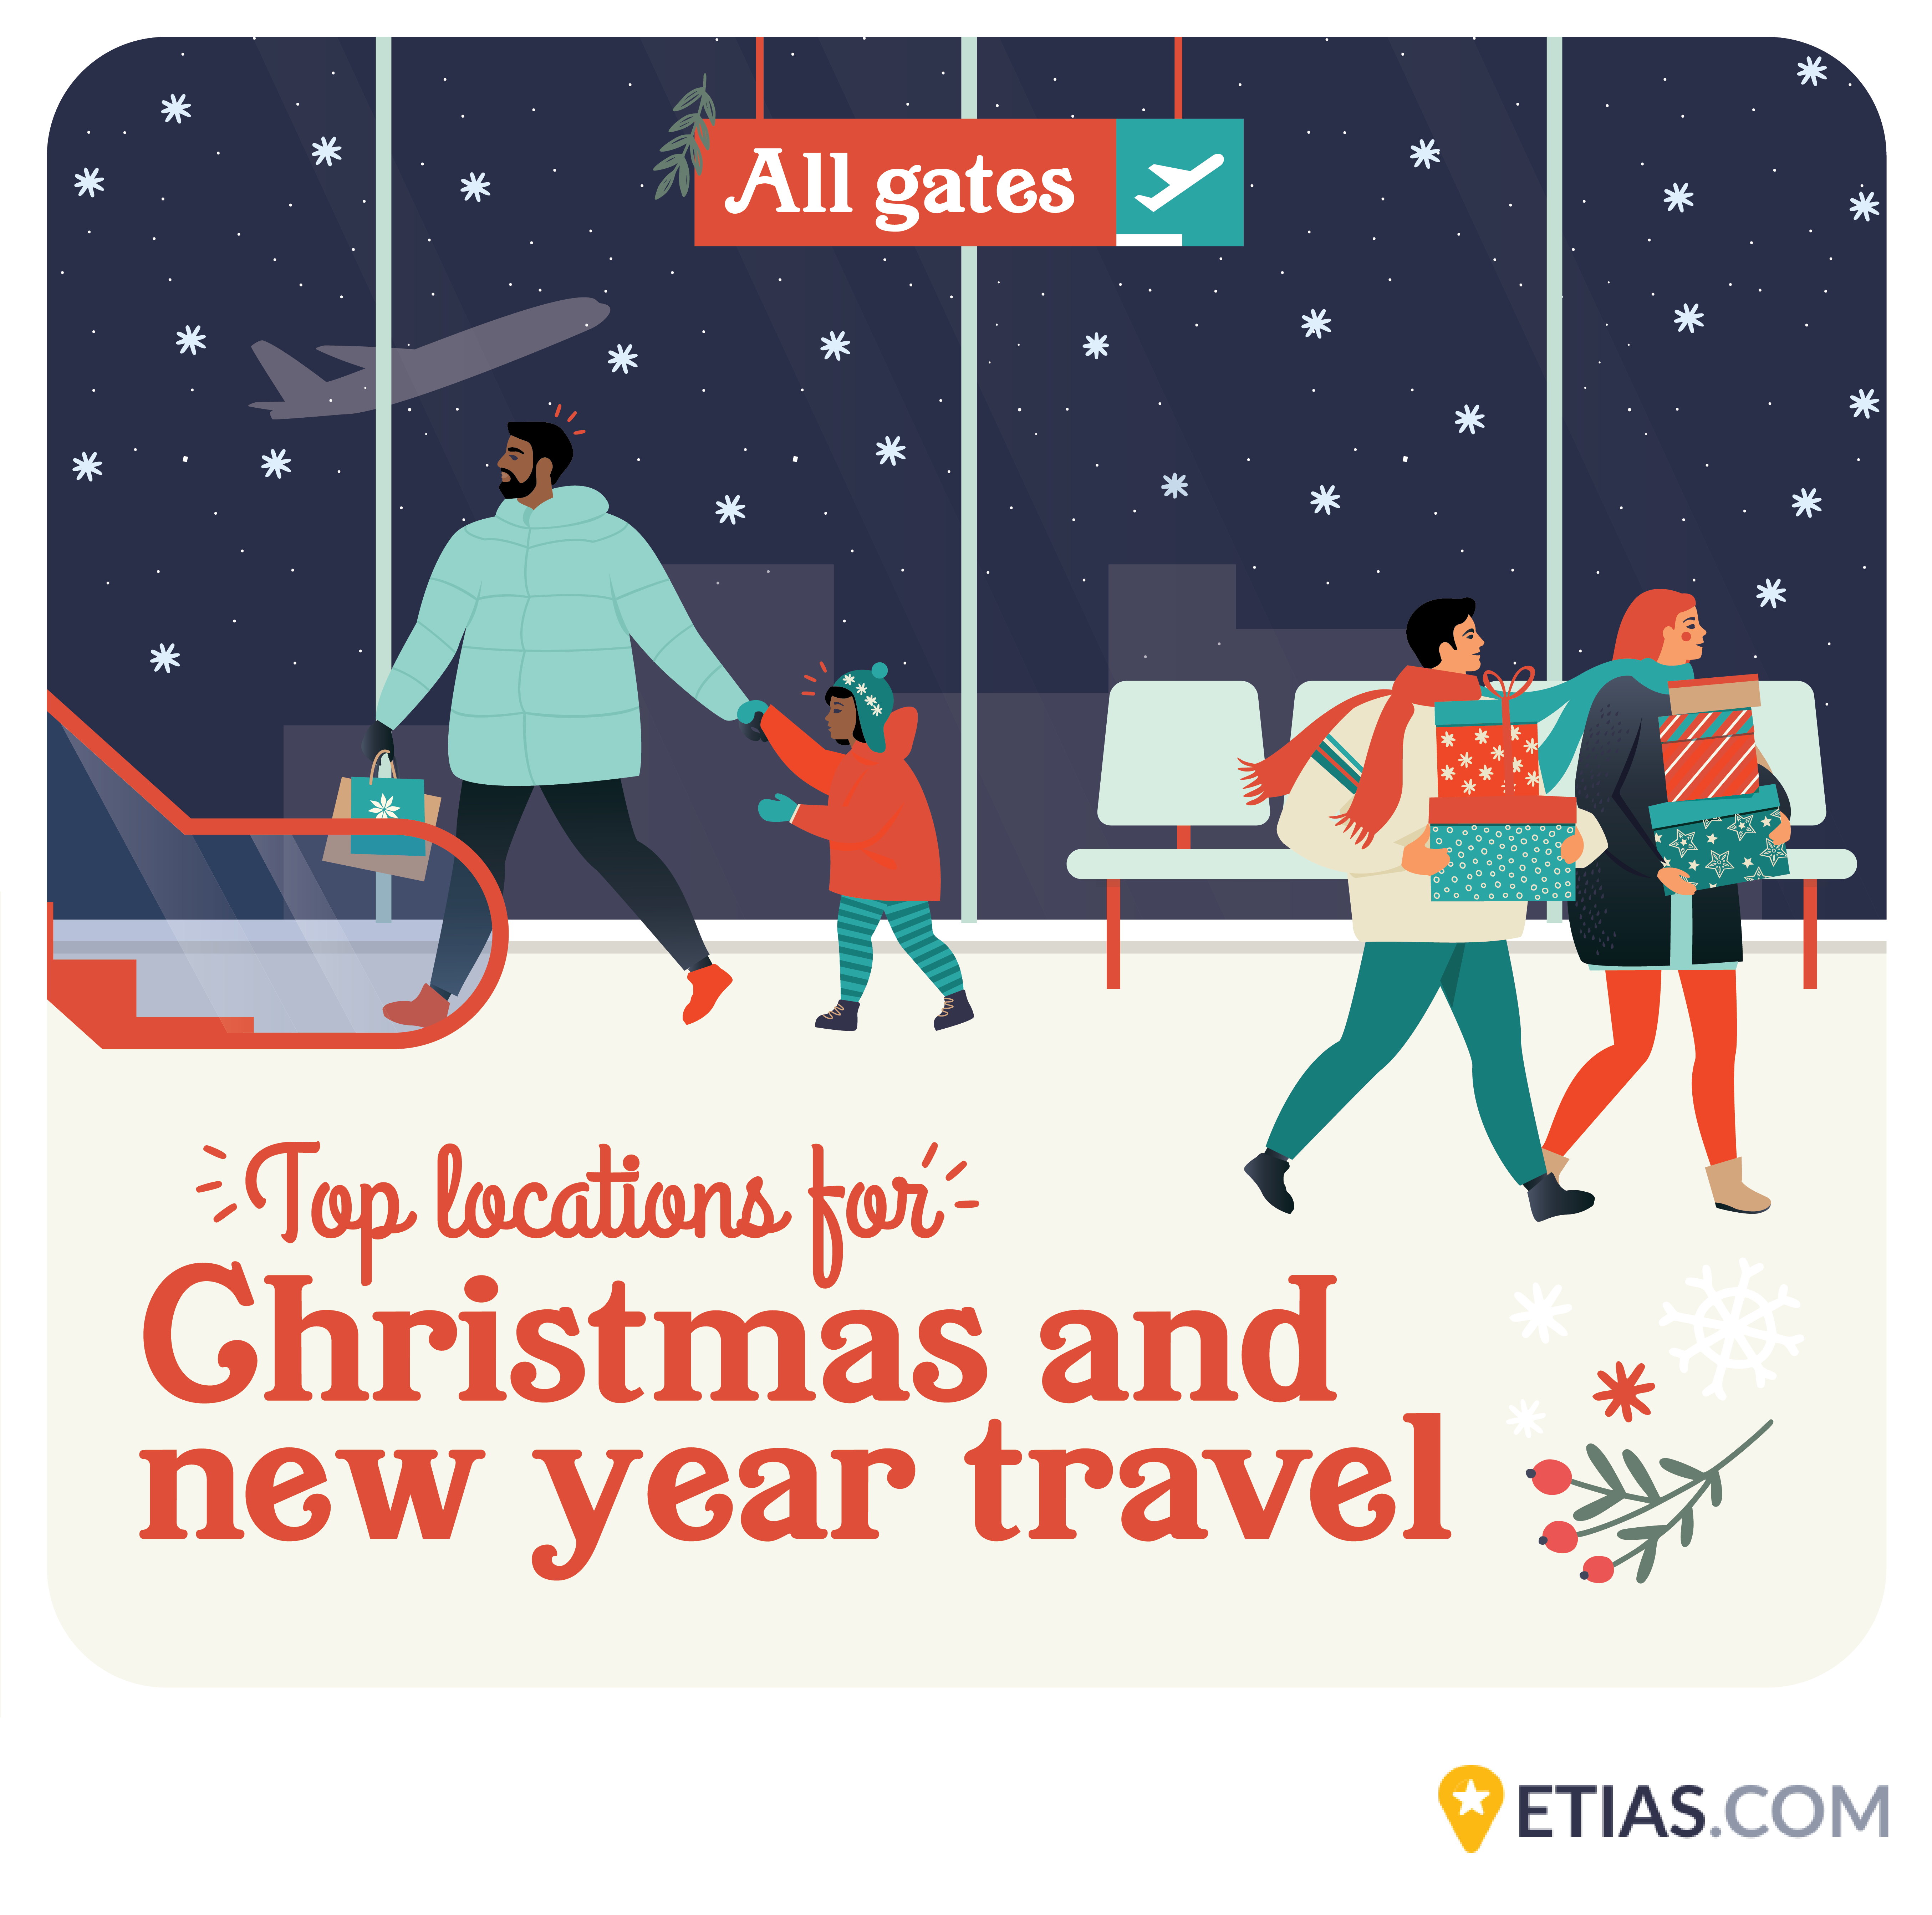 Top locations for Christmas and new year travel